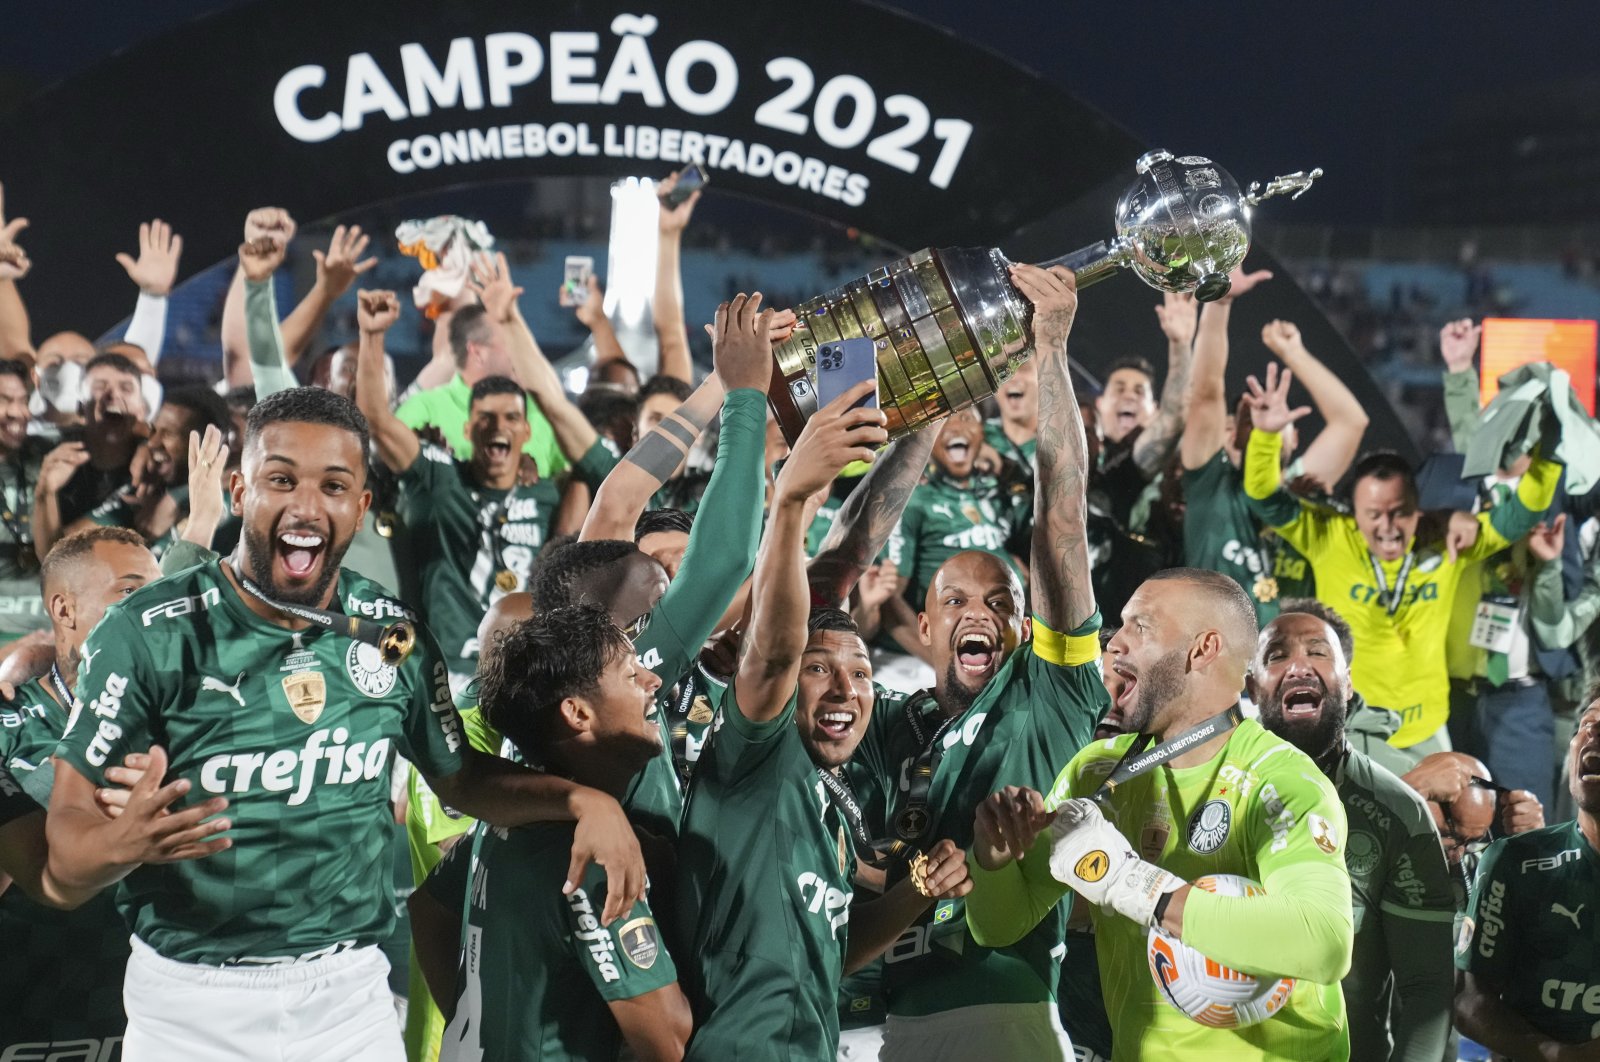 Palmeiras players celebrate with the trophy after beating Flamengo 2-1 in Copa Libertadores final Montevideo, Uruguay, Nov. 27, 2021. (AP Photo)